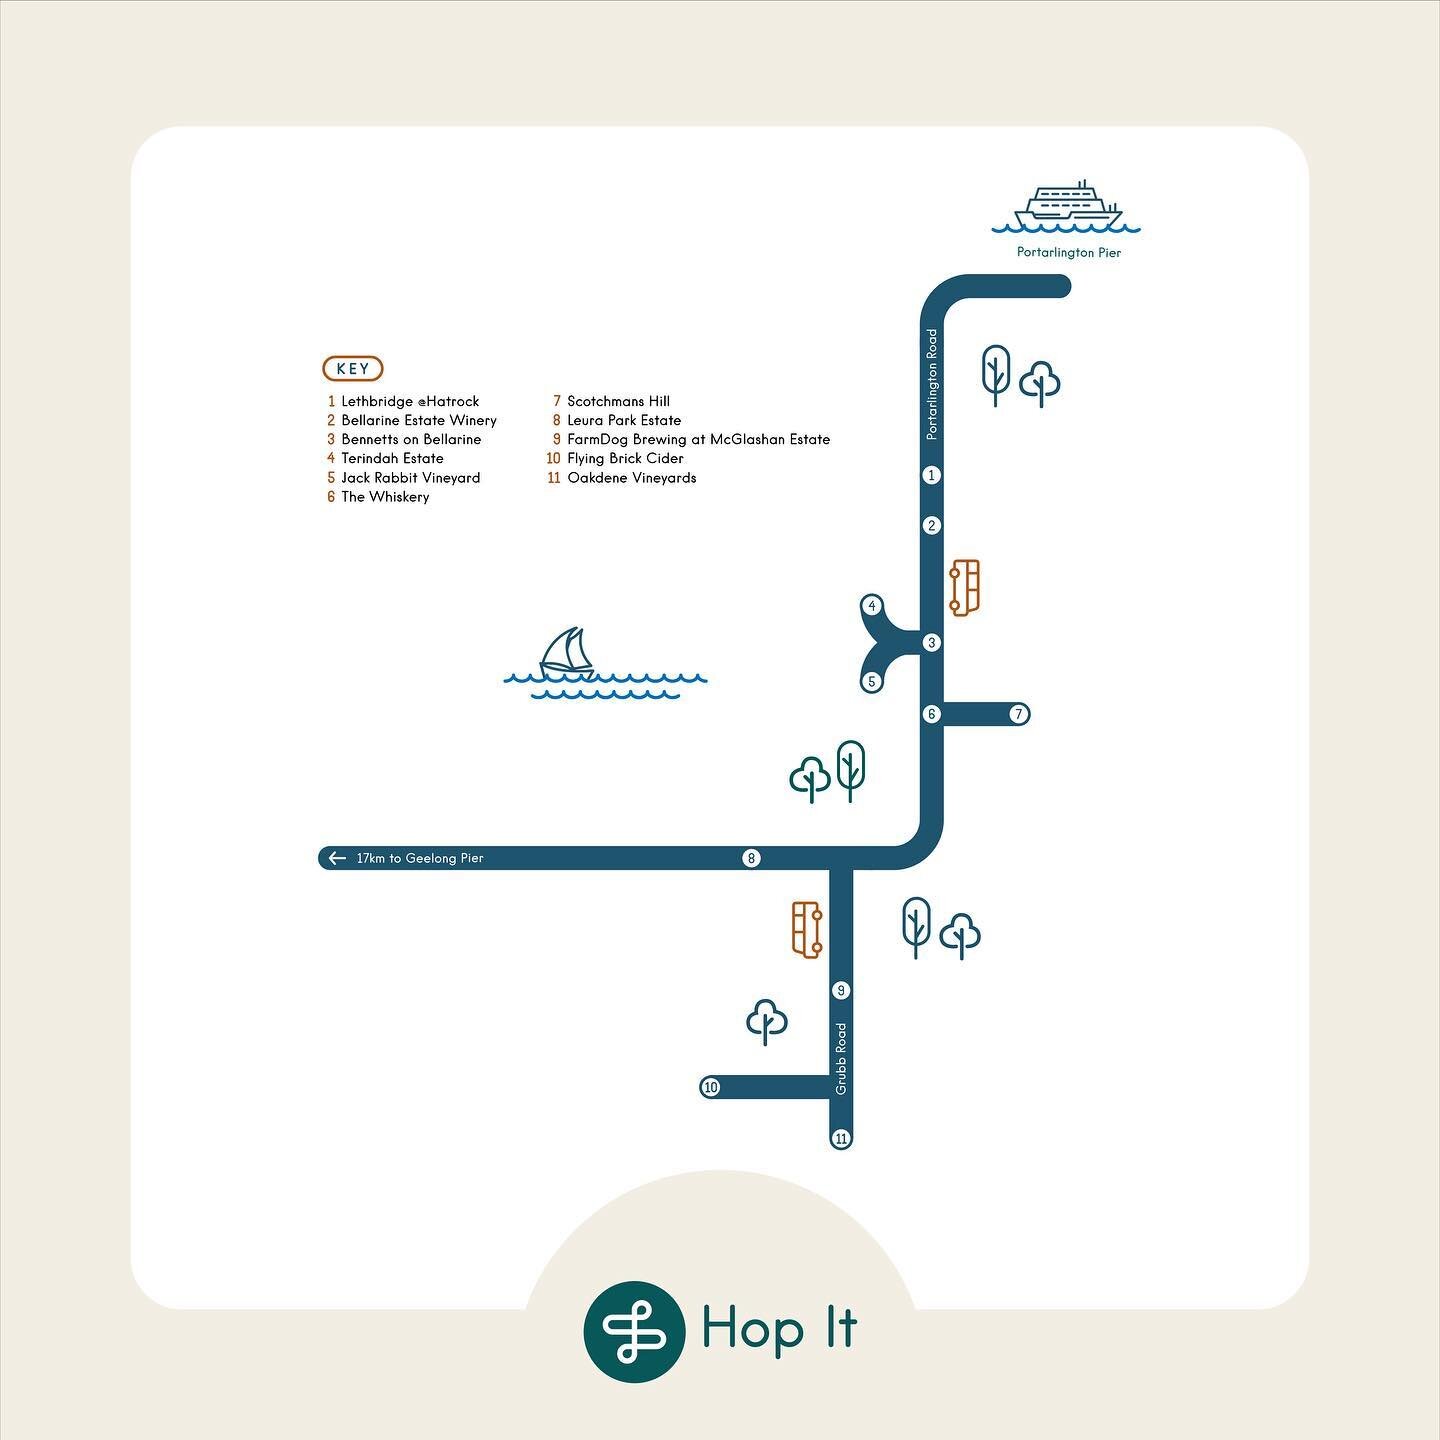 Did you hear? Hop It are coming to the Bellarine (which just happens to be where I live, so I&rsquo;m very excited). 🙌🏼

Here&rsquo;s a little map I created of the bus route, which includes all my favourite places!

Make sure you check out @hop_it_